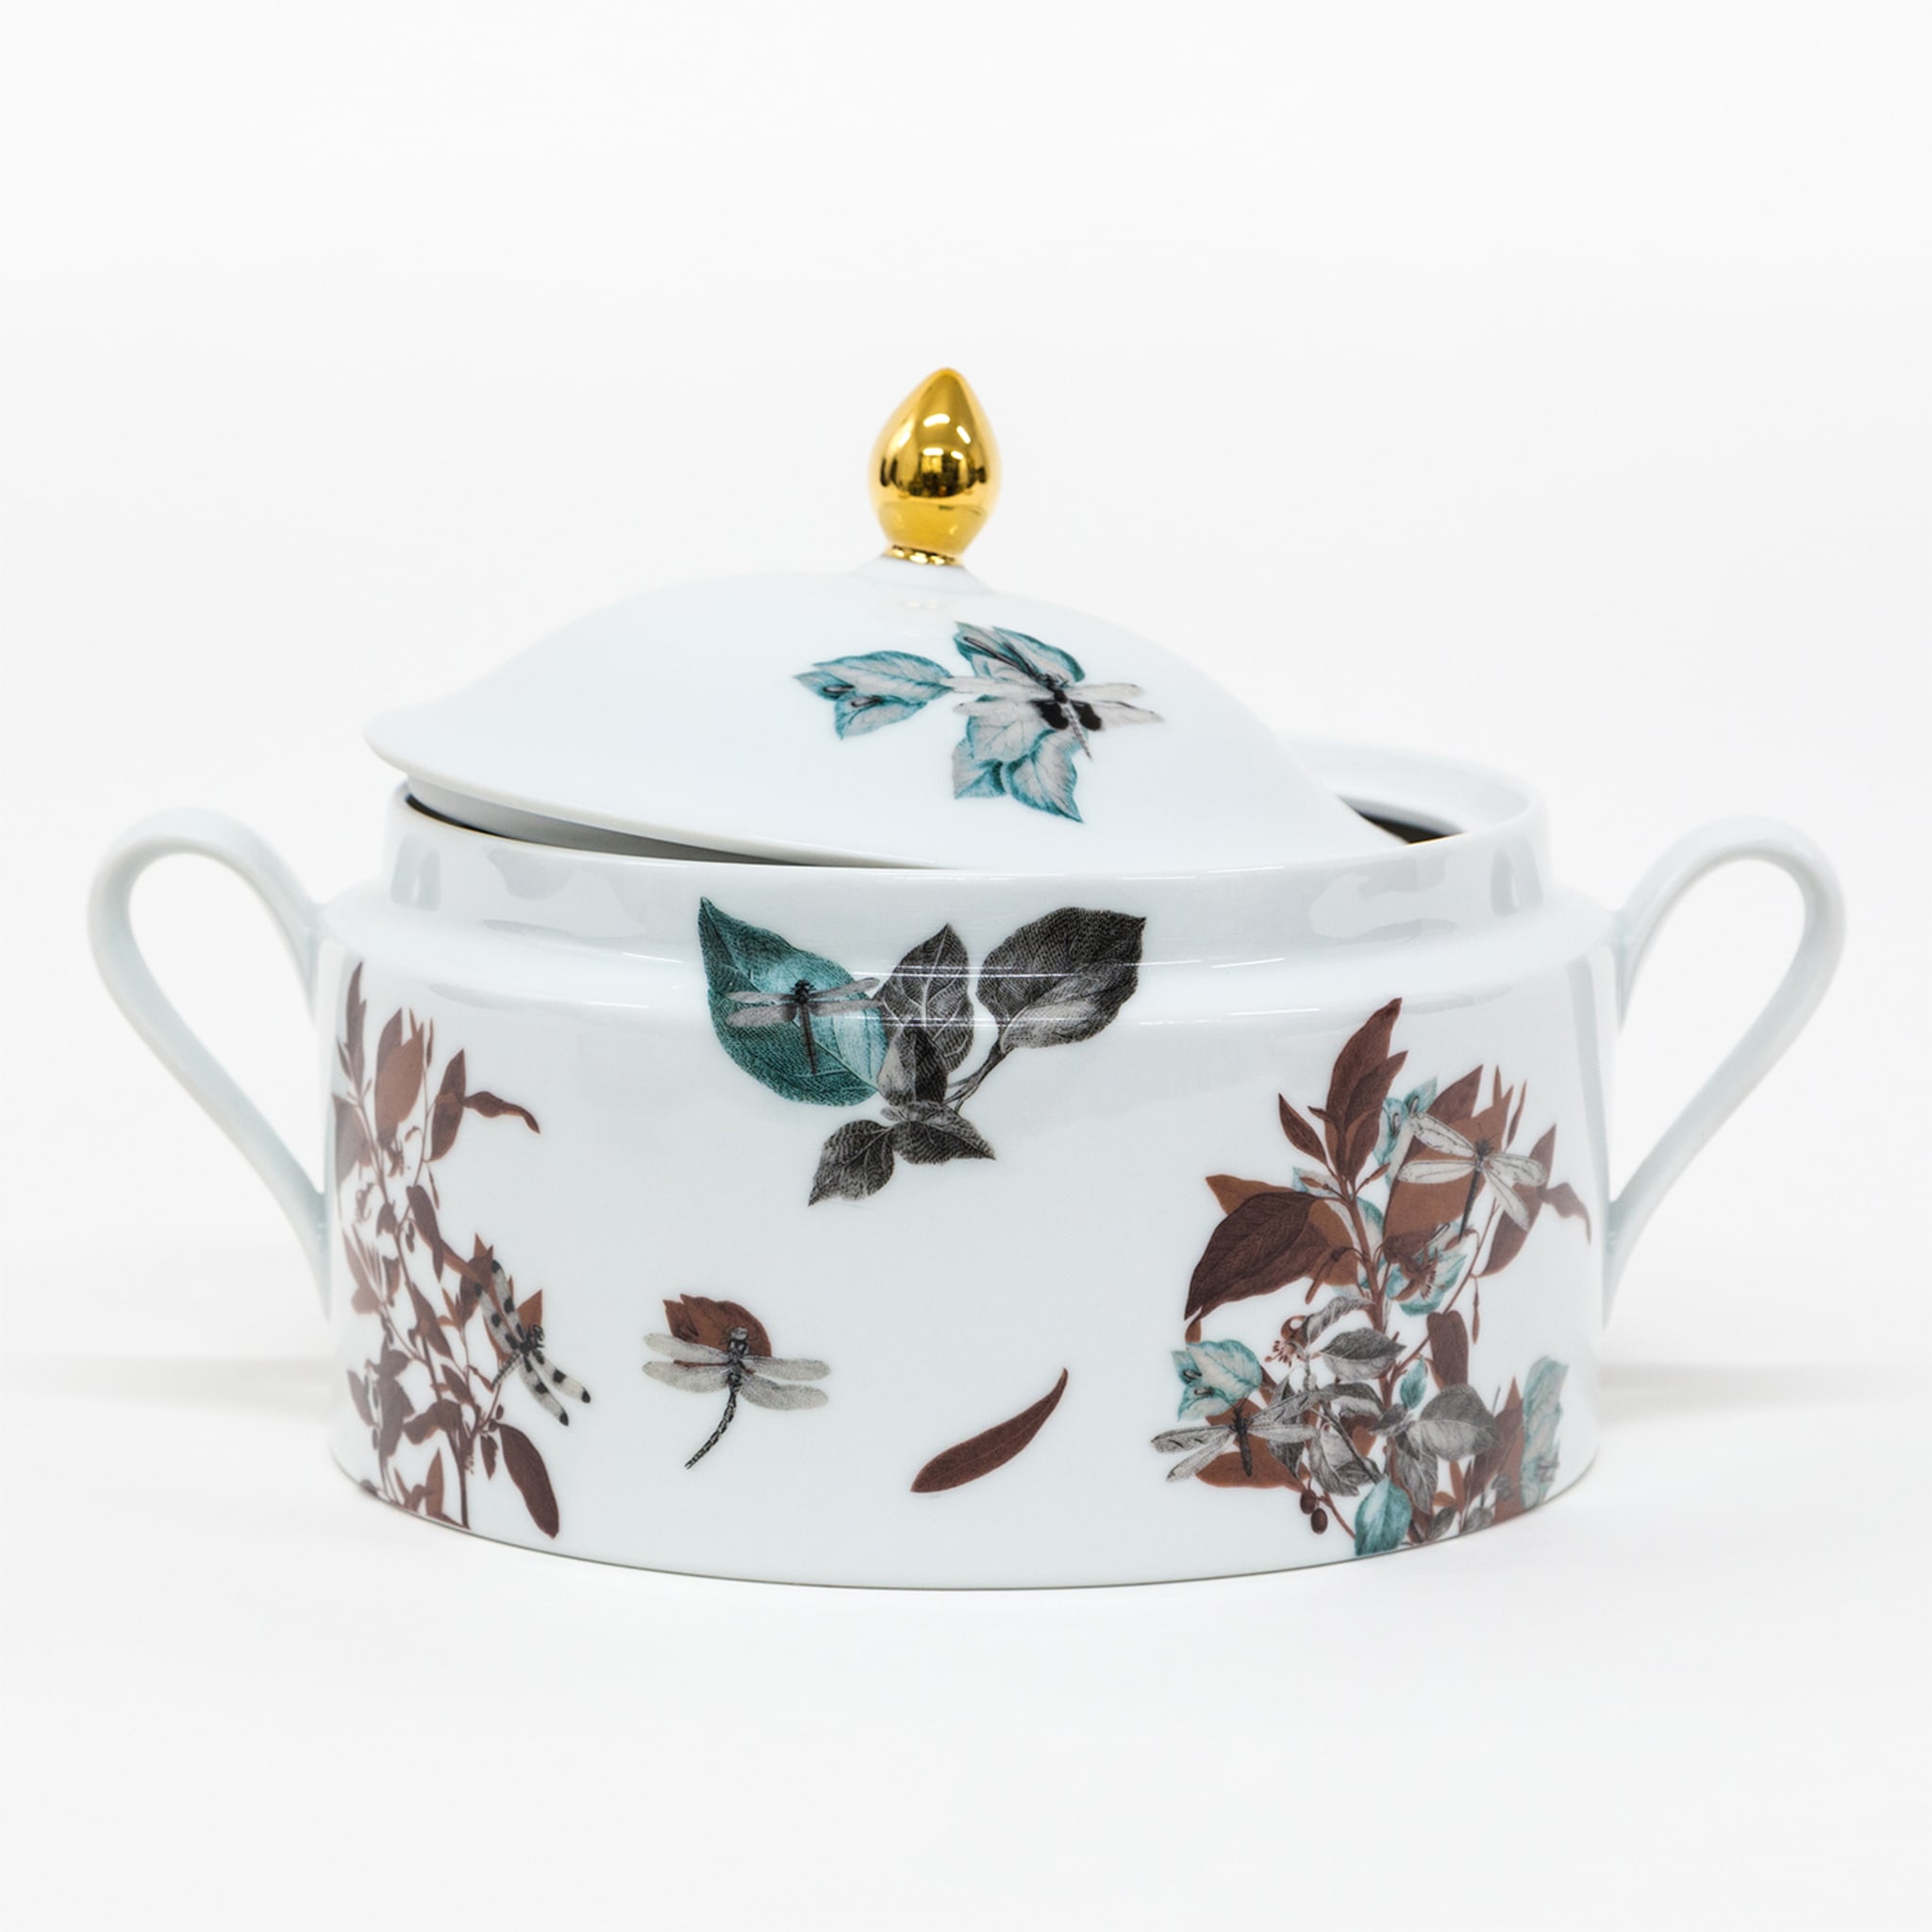 Black Dragon Pool Porcelain Tureen With Leaves And Dragonflies - Alternative view 1